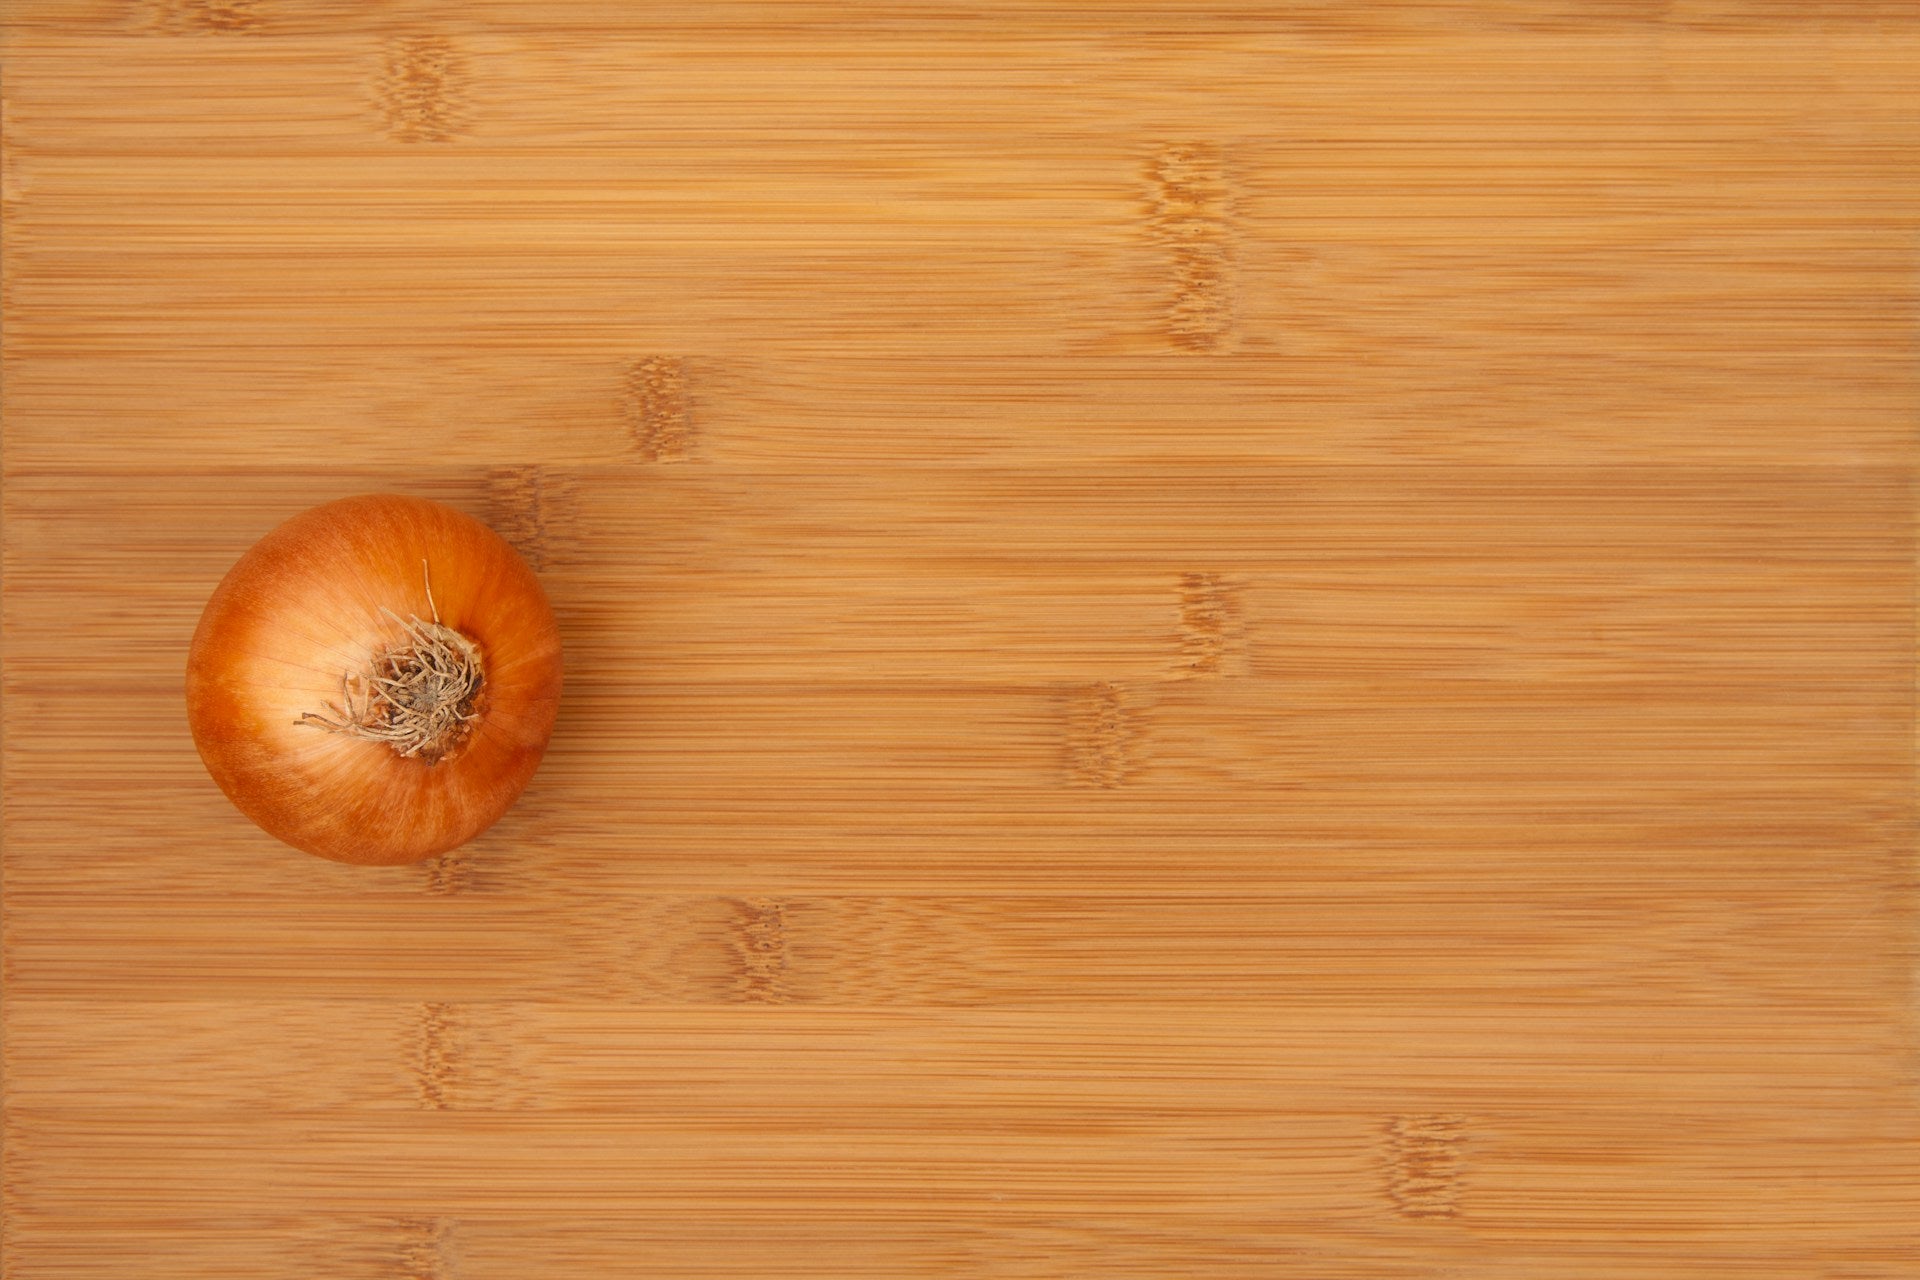 On display is a single yellow onion, of the variety Long Utah Yellow Sweet Spanish.  Freshly harvested, and fully washed, the onion is resting on a butcher block cutting board.